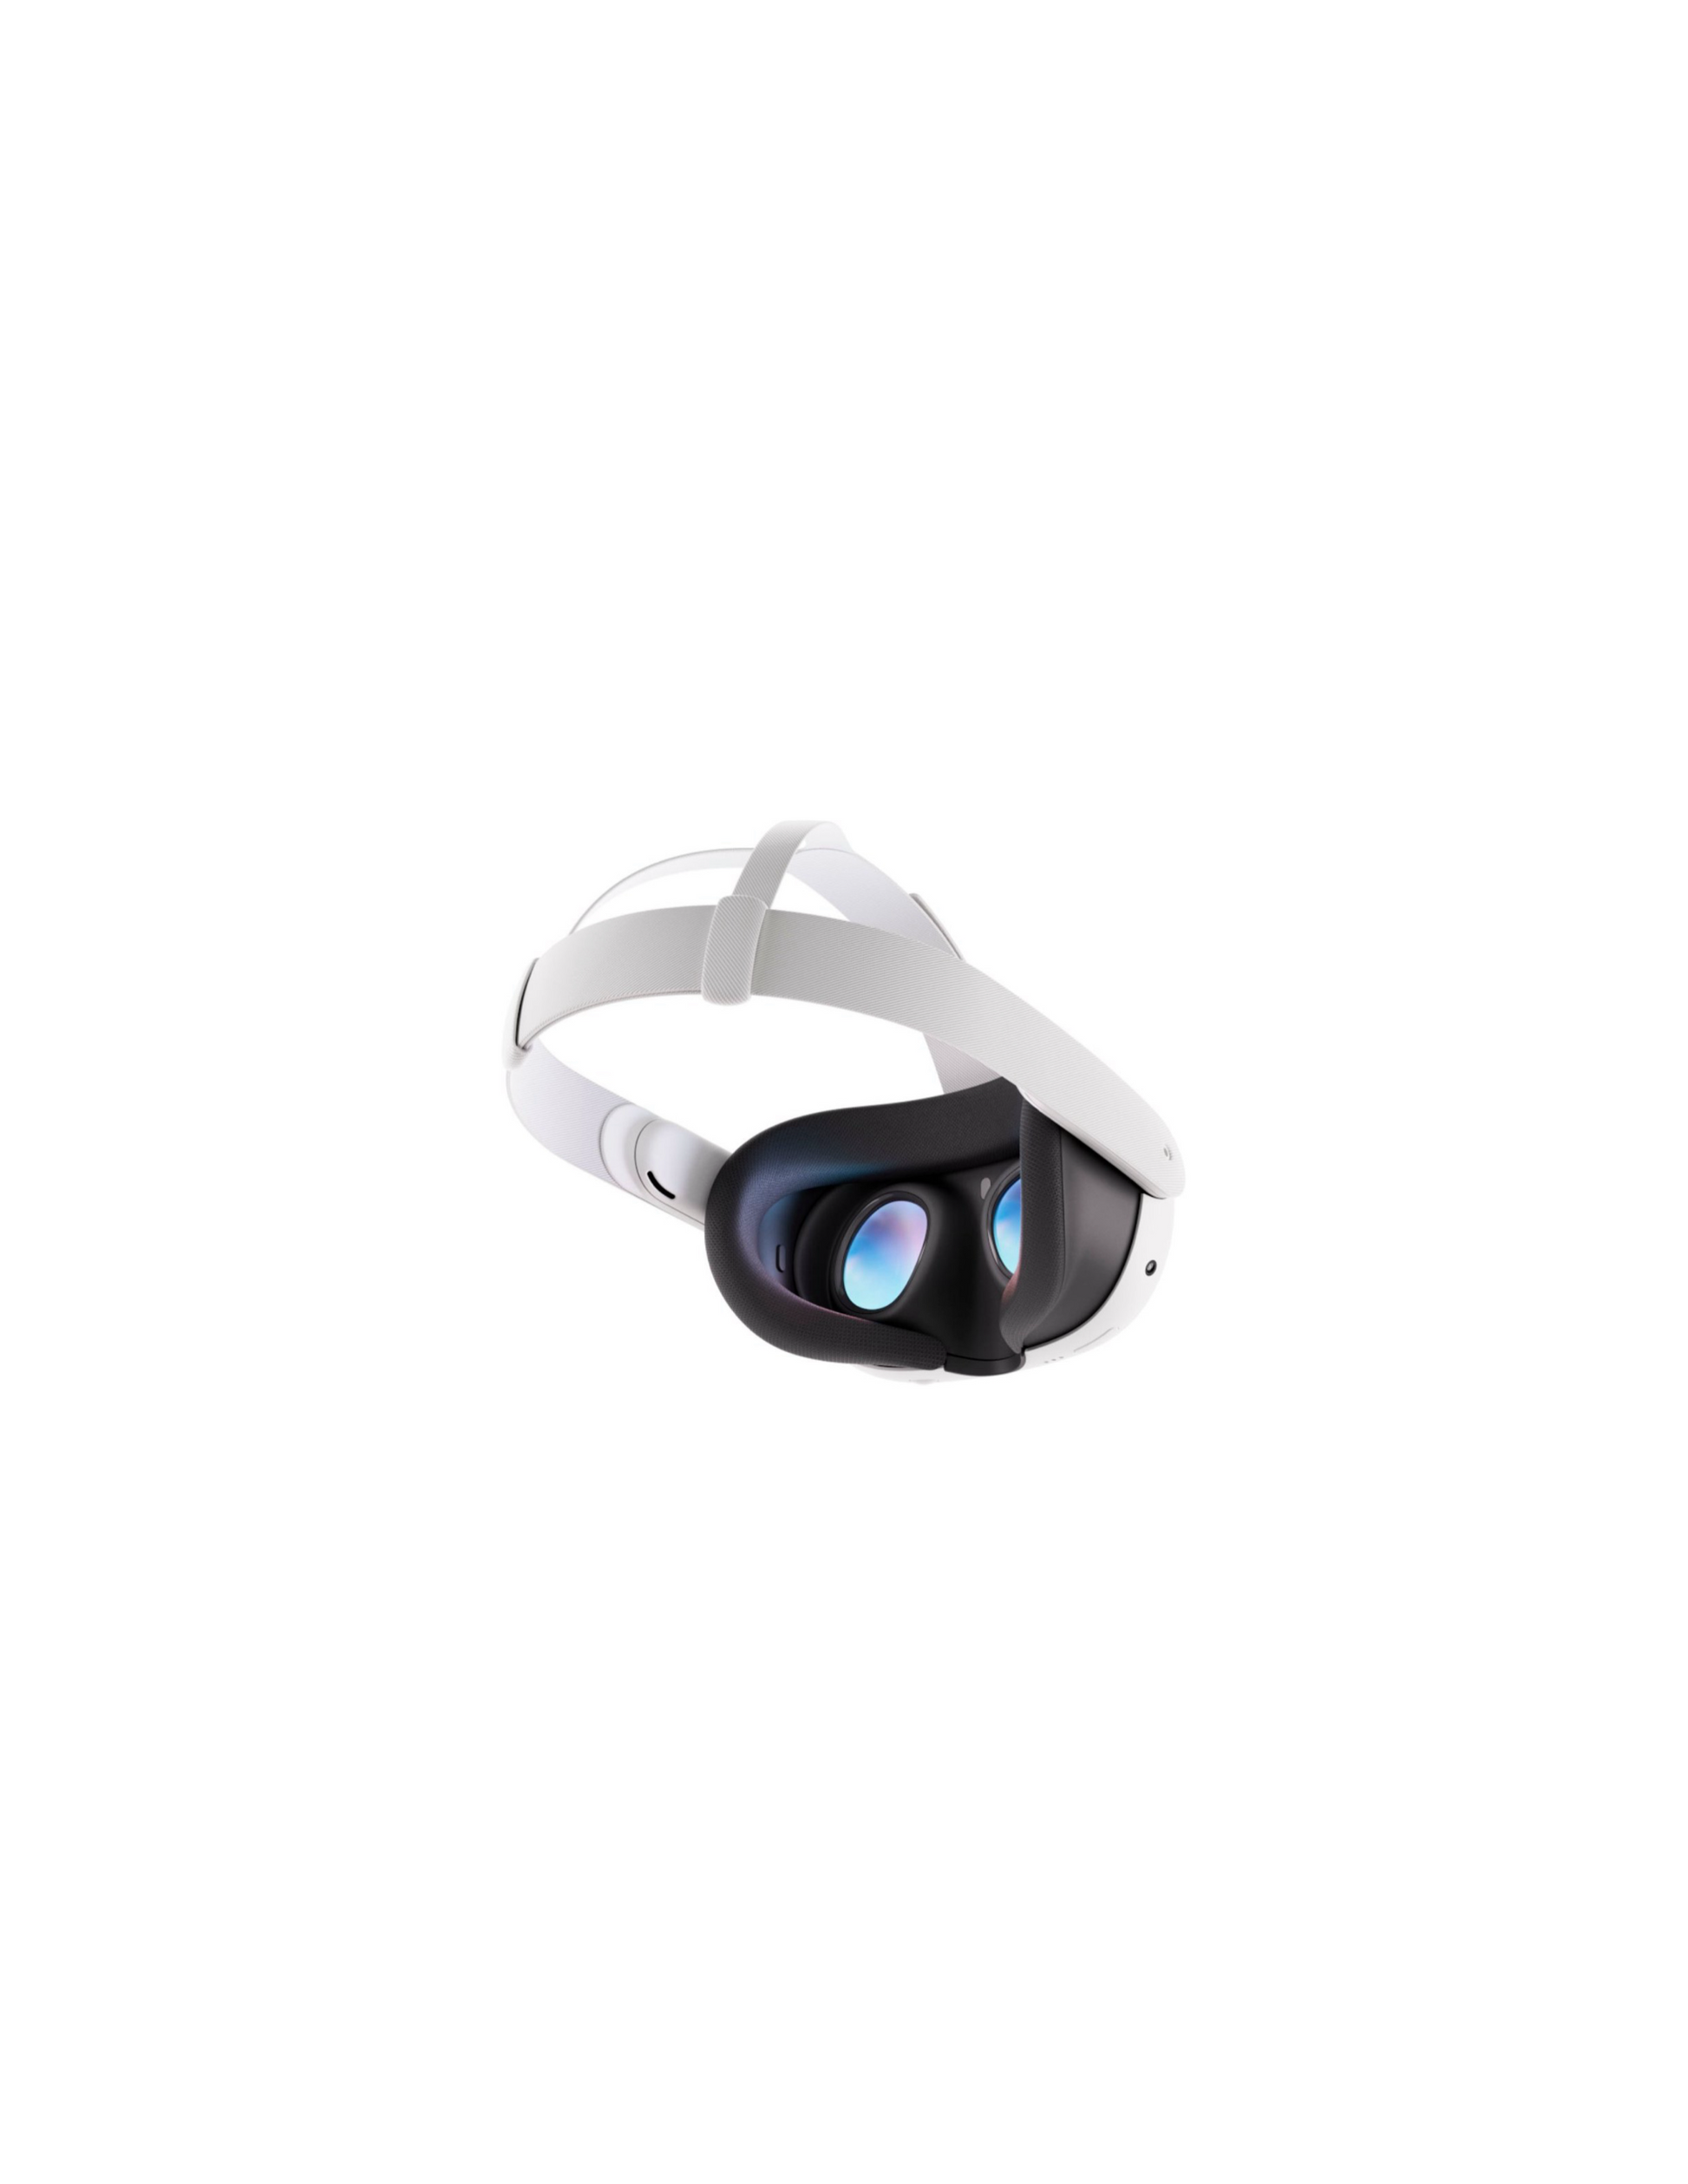 Meta Quest 3 128GB VR Headset Color White 2023 New Latest Model